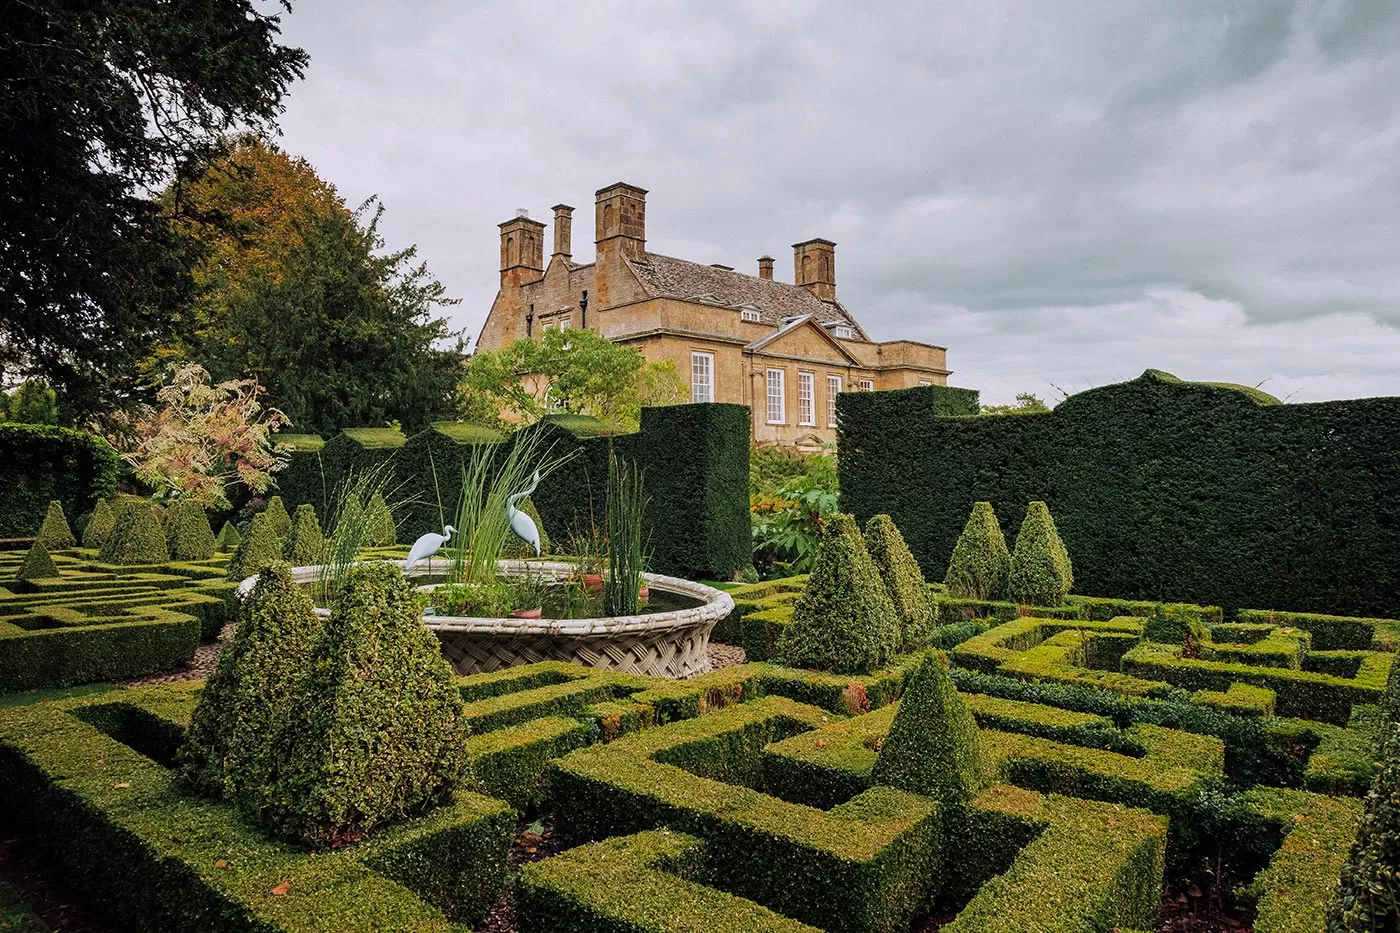 Things to do in Moreton-in-Marsh - The Cotswolds - Bourton House Garden - The Knot Garden